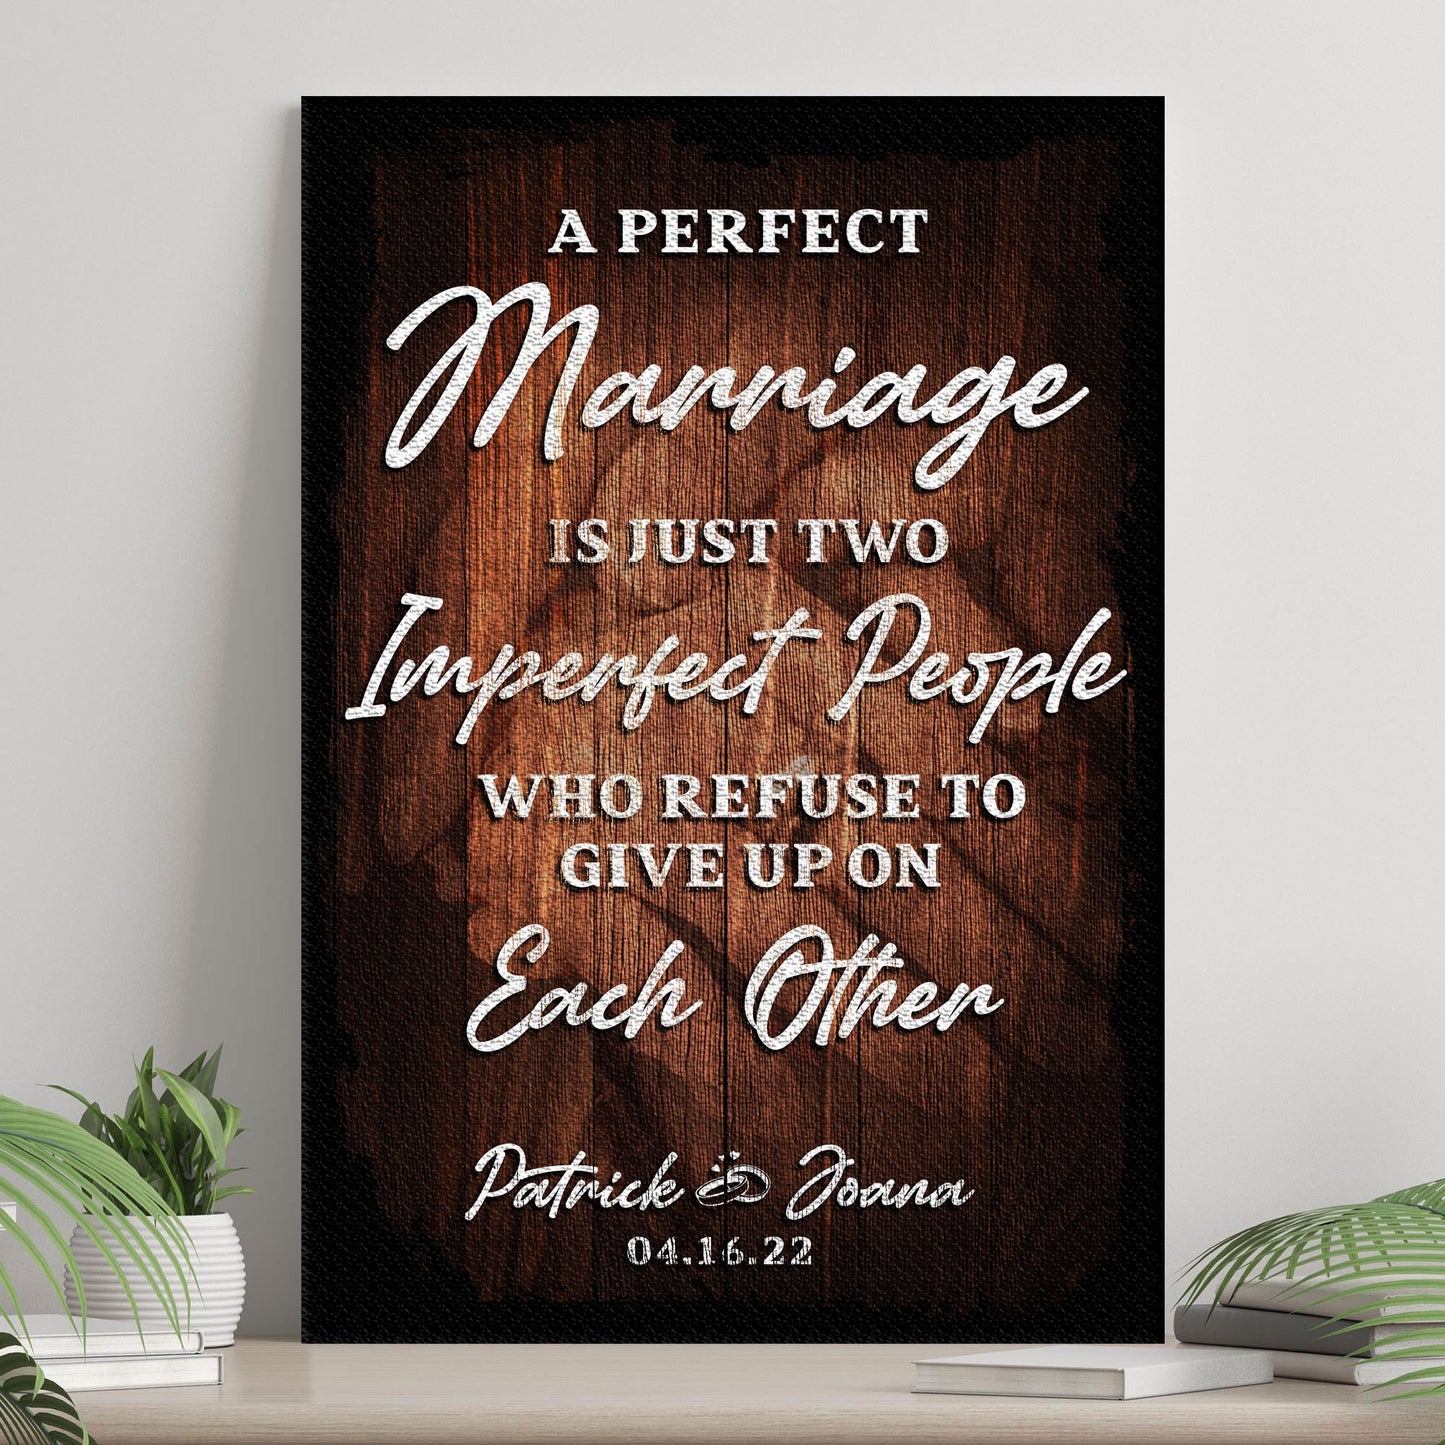 A Perfect Marriage Sign  - Image by Tailored Canvases